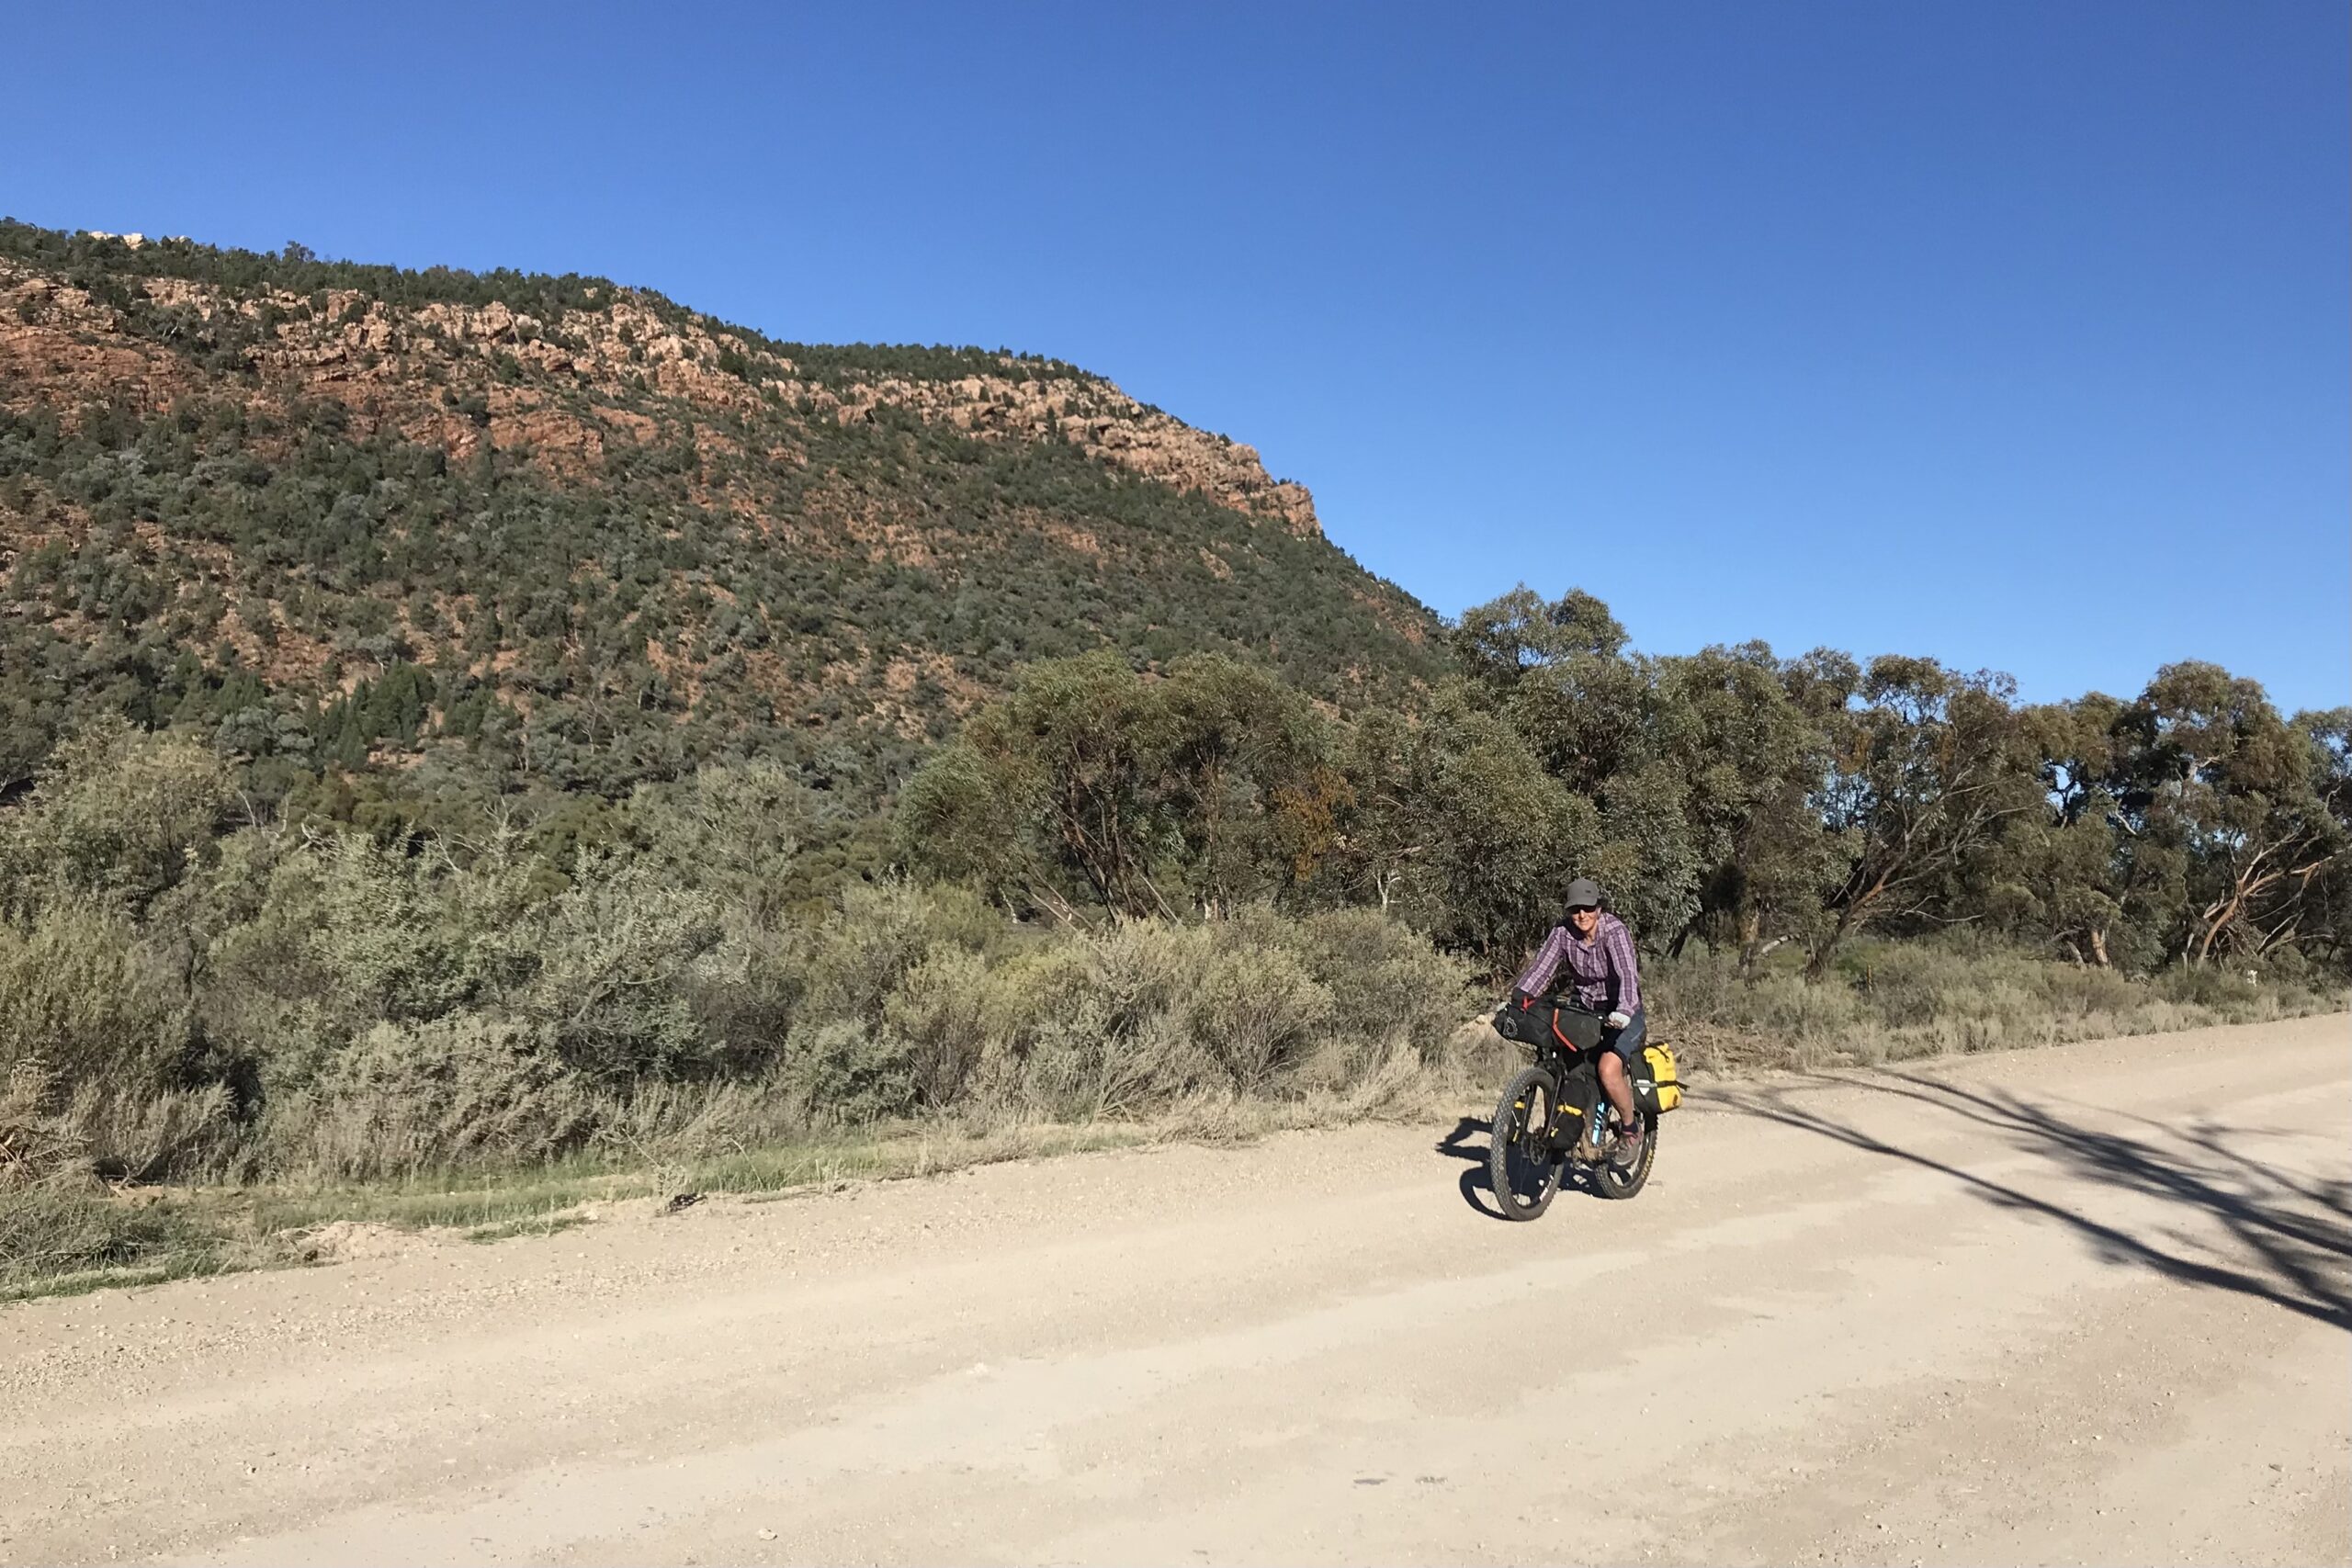 Starting into the southern Flinders ranges